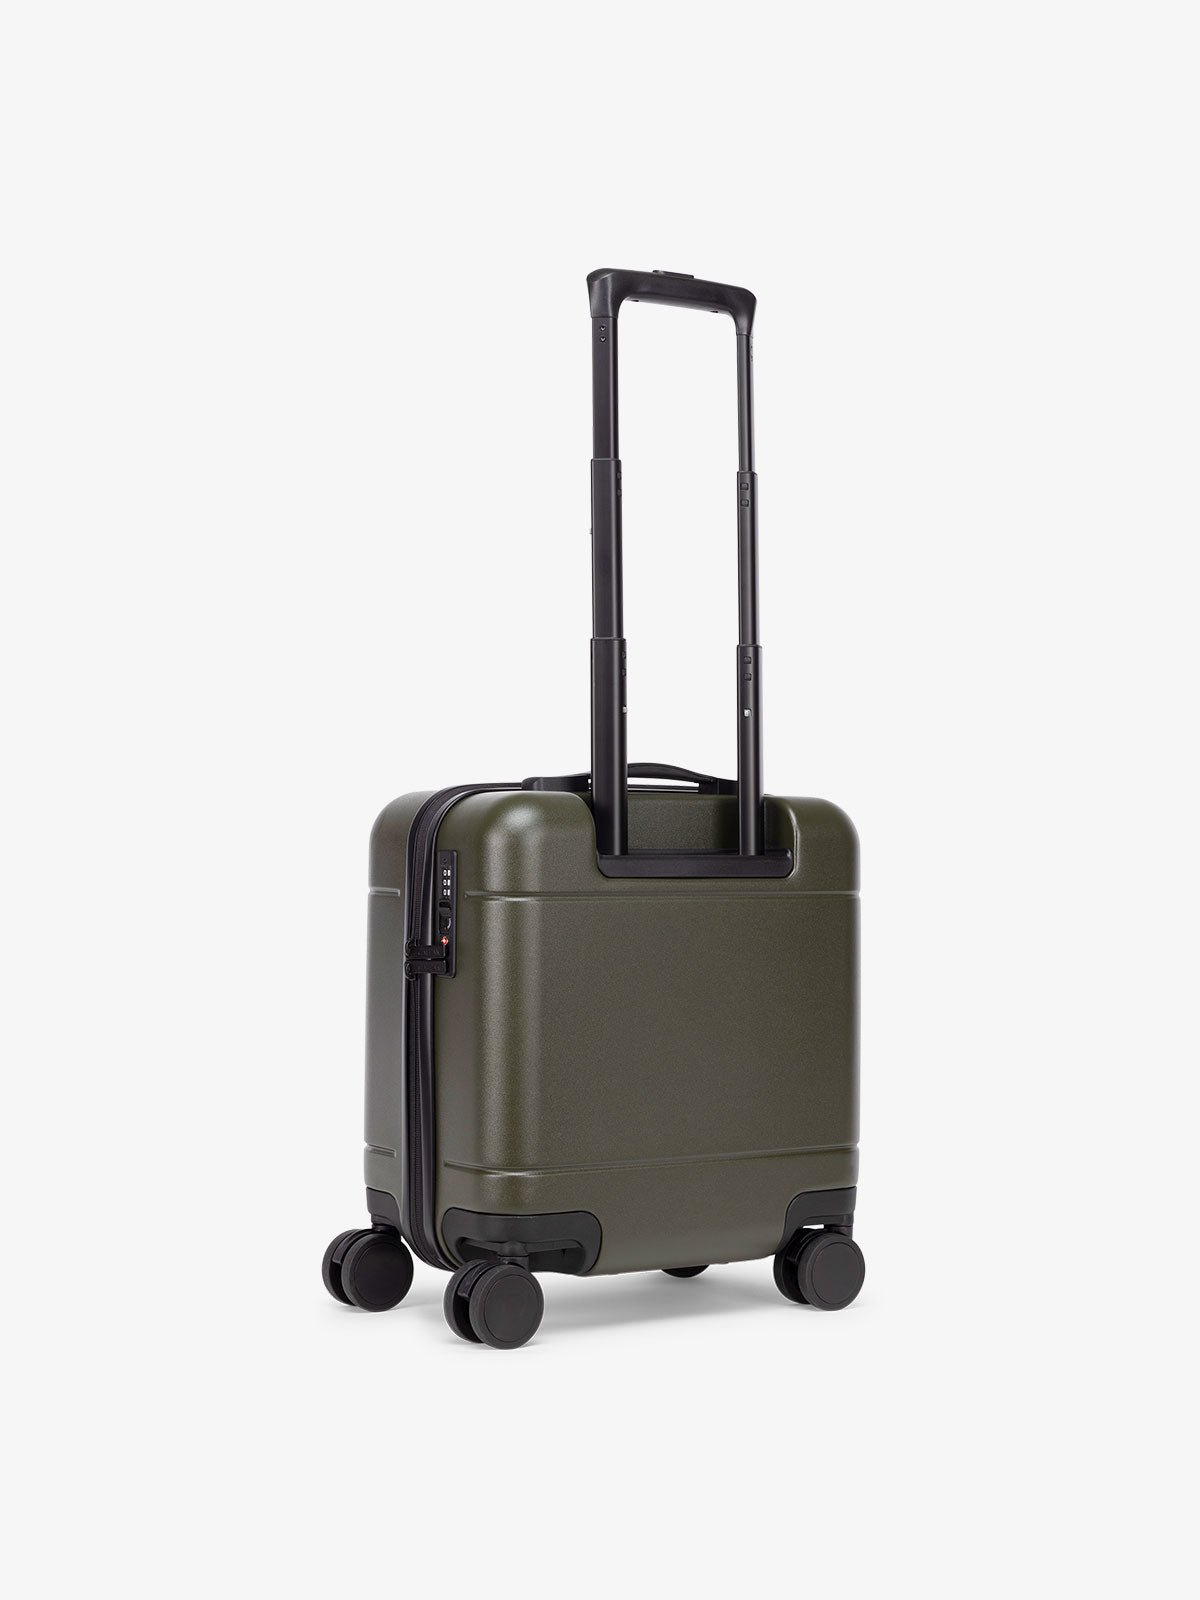 hard case mini luggage carry on with 360 spinner wheels